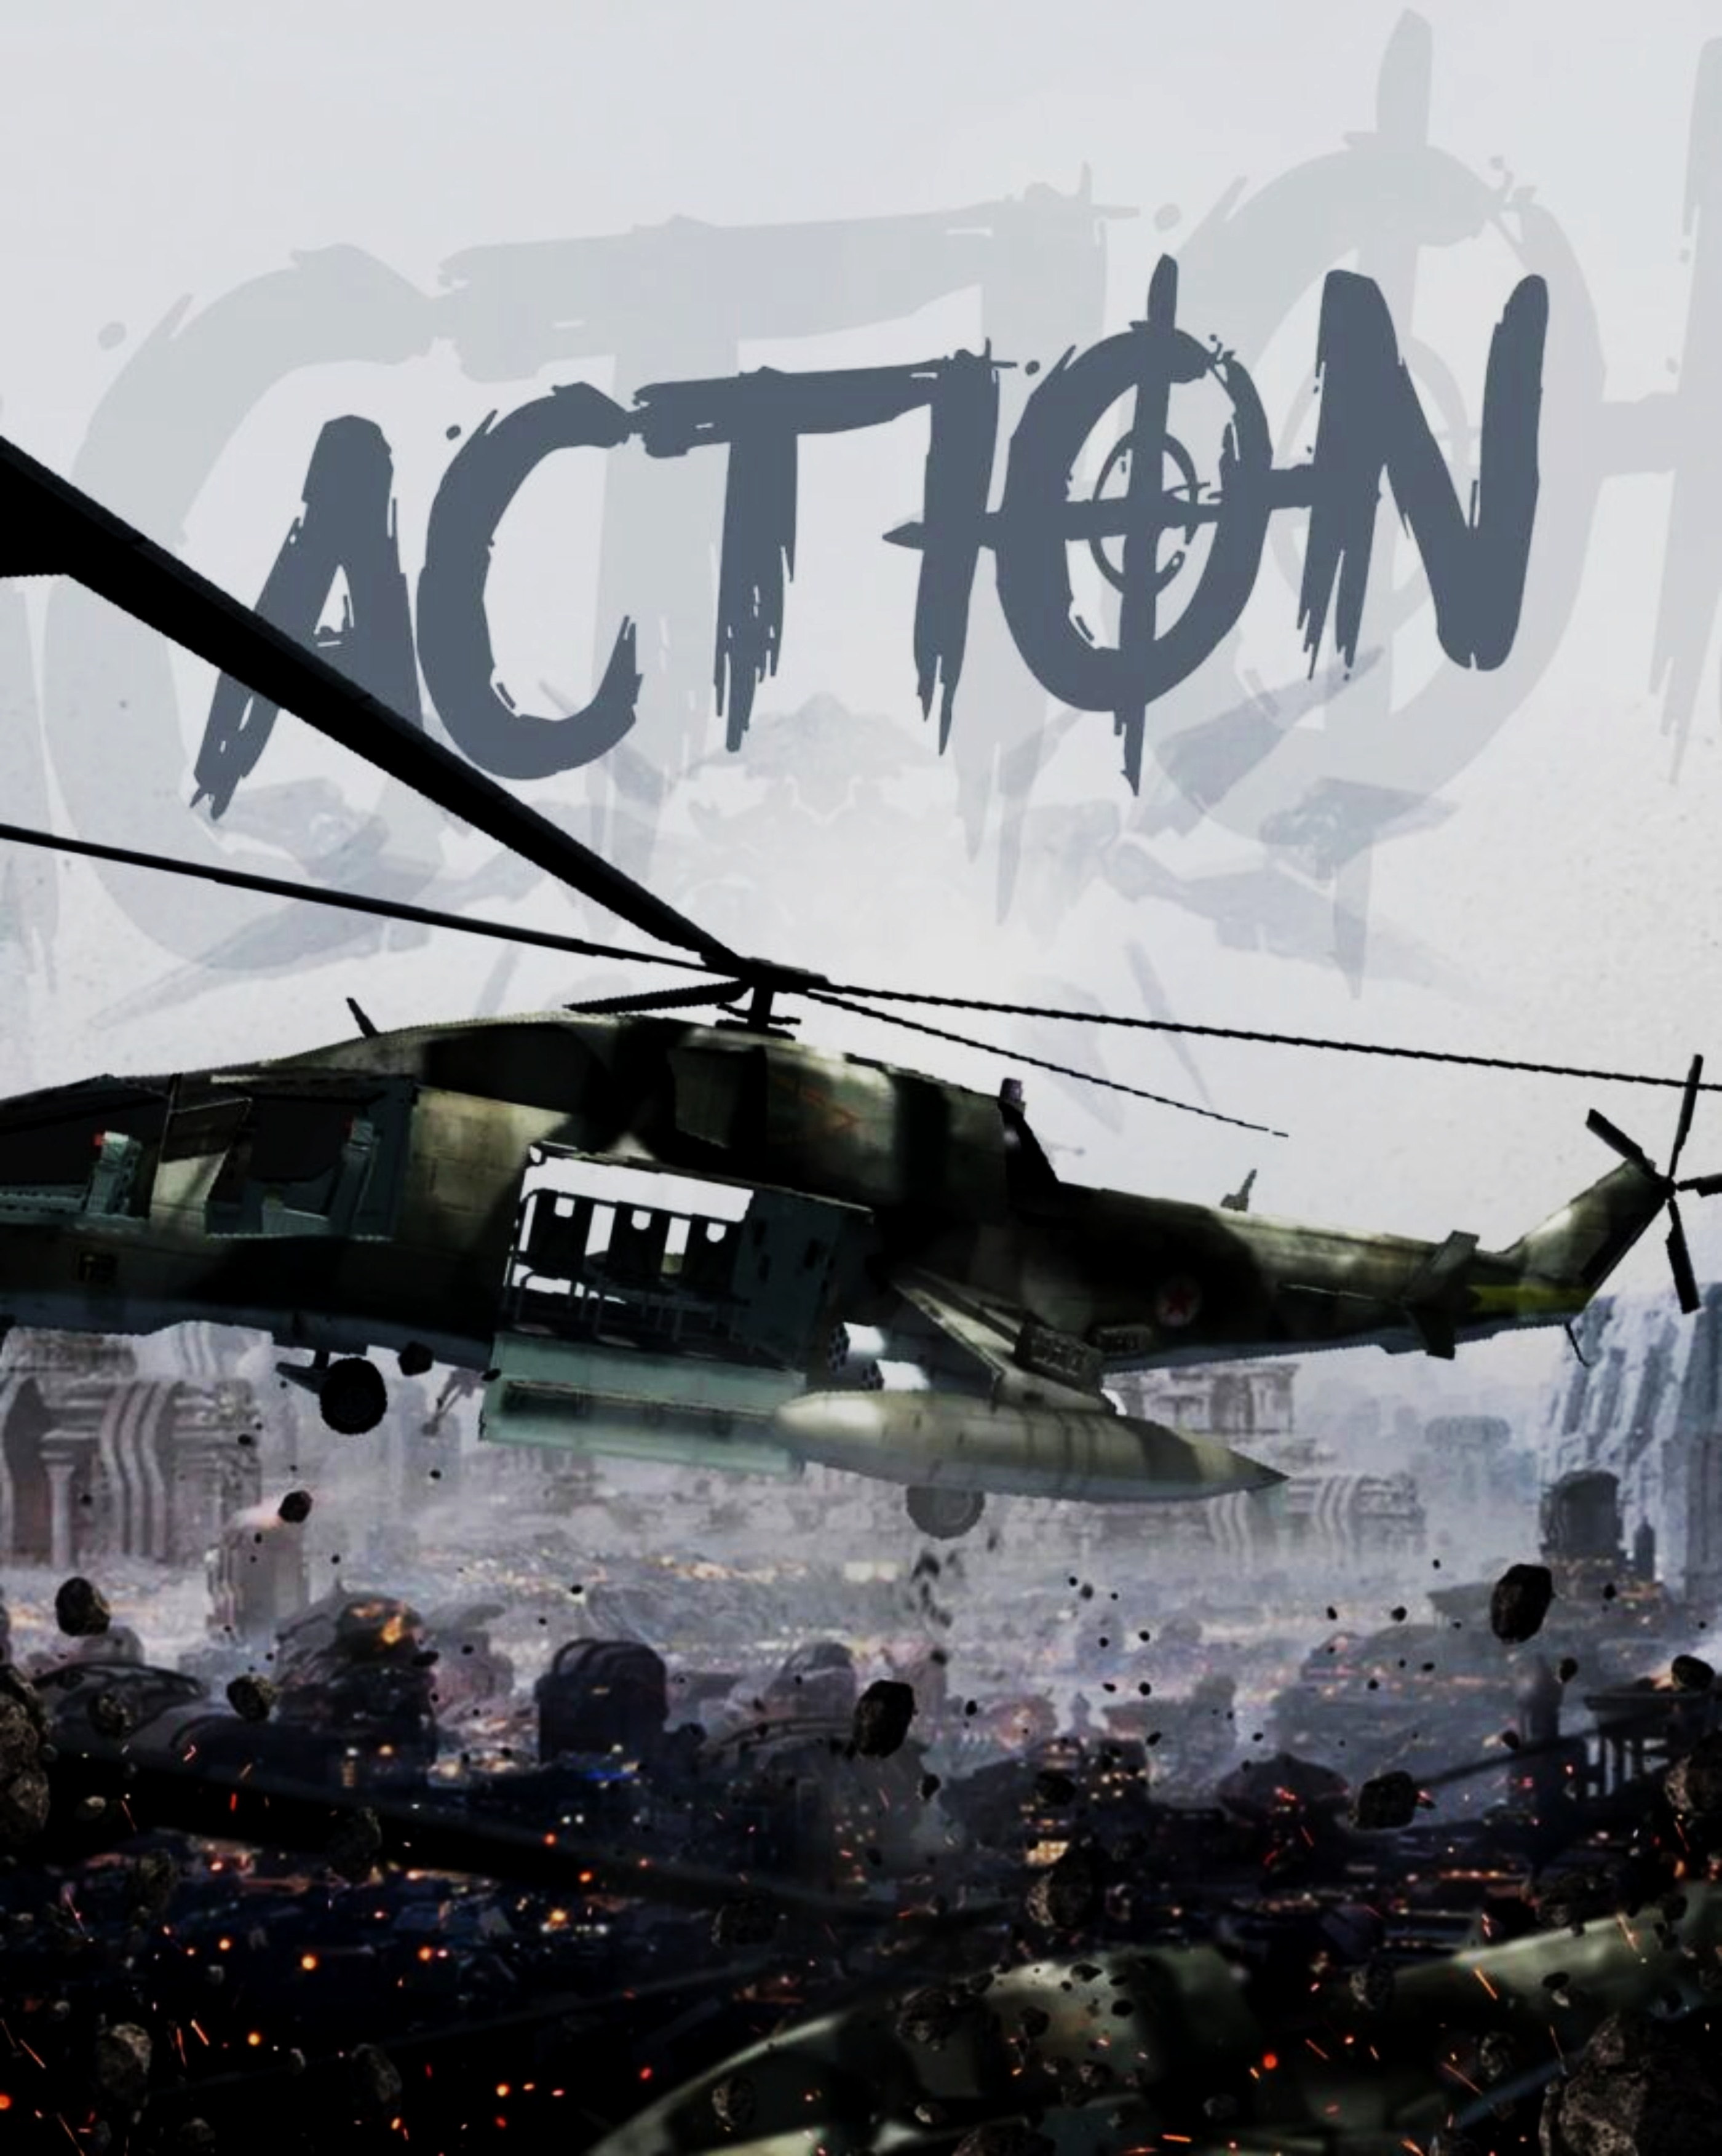 You are currently viewing Action movie postser image editing background download free